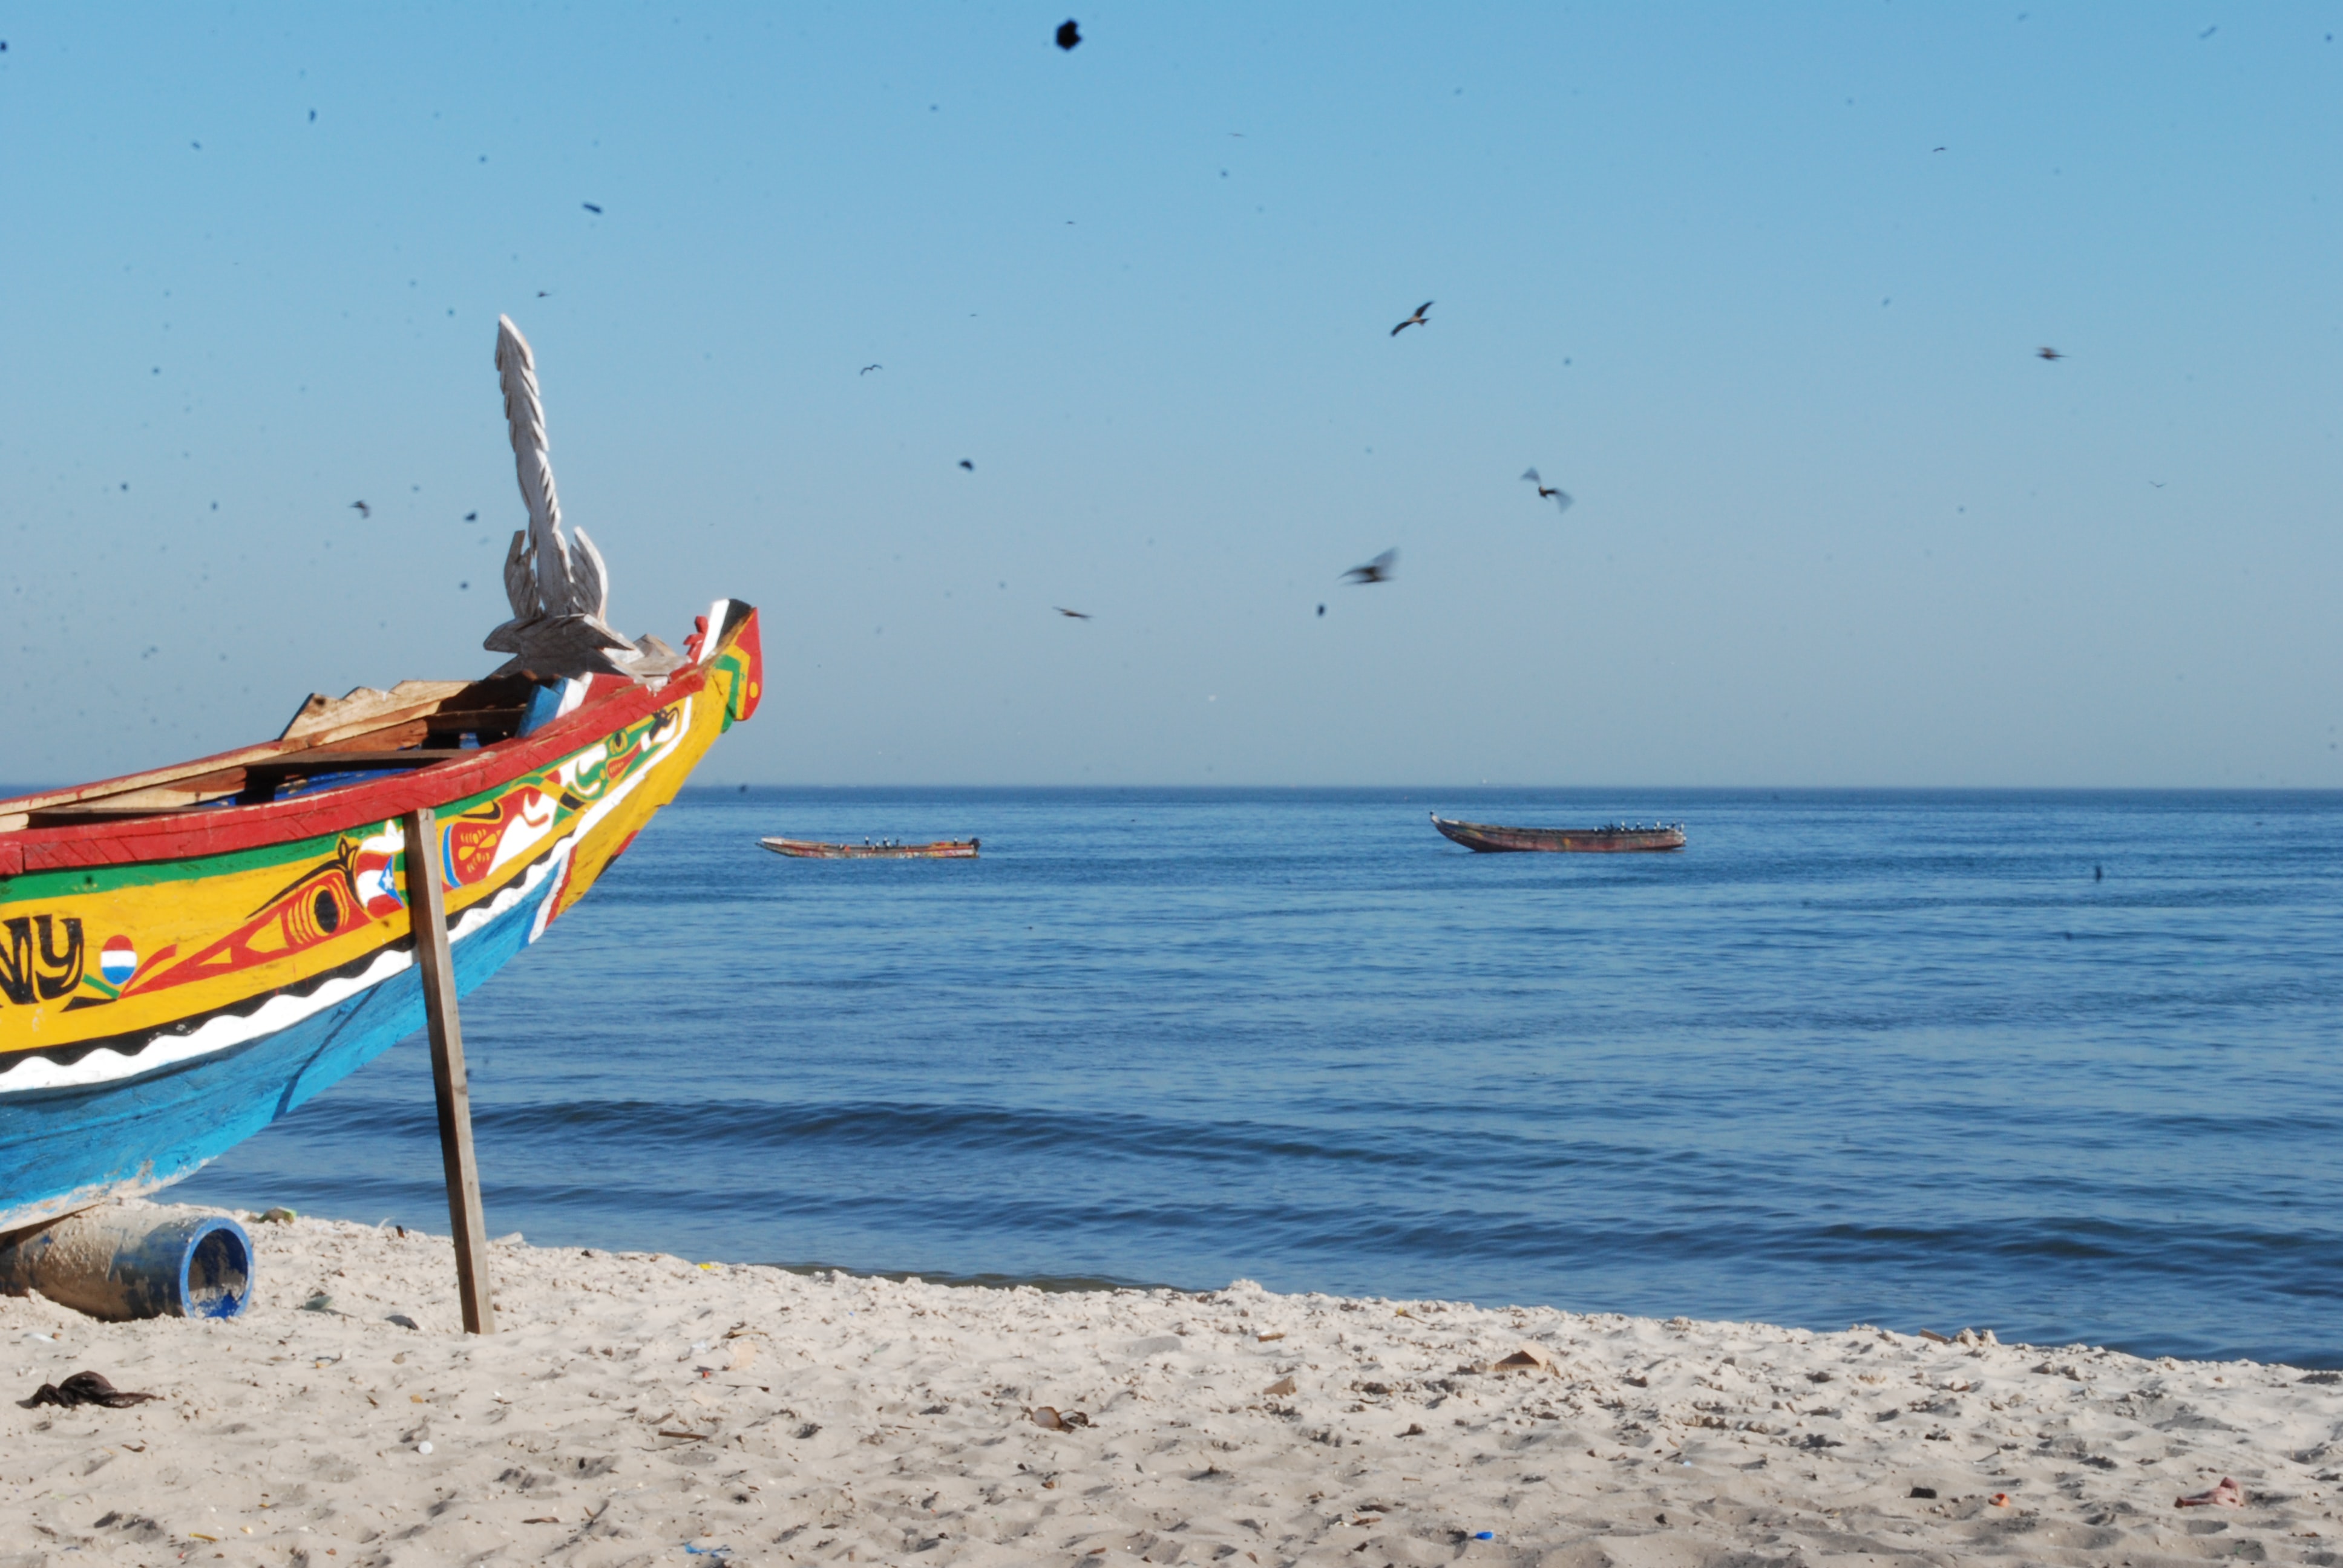 Colorful fishing boat on a beach in Senegal